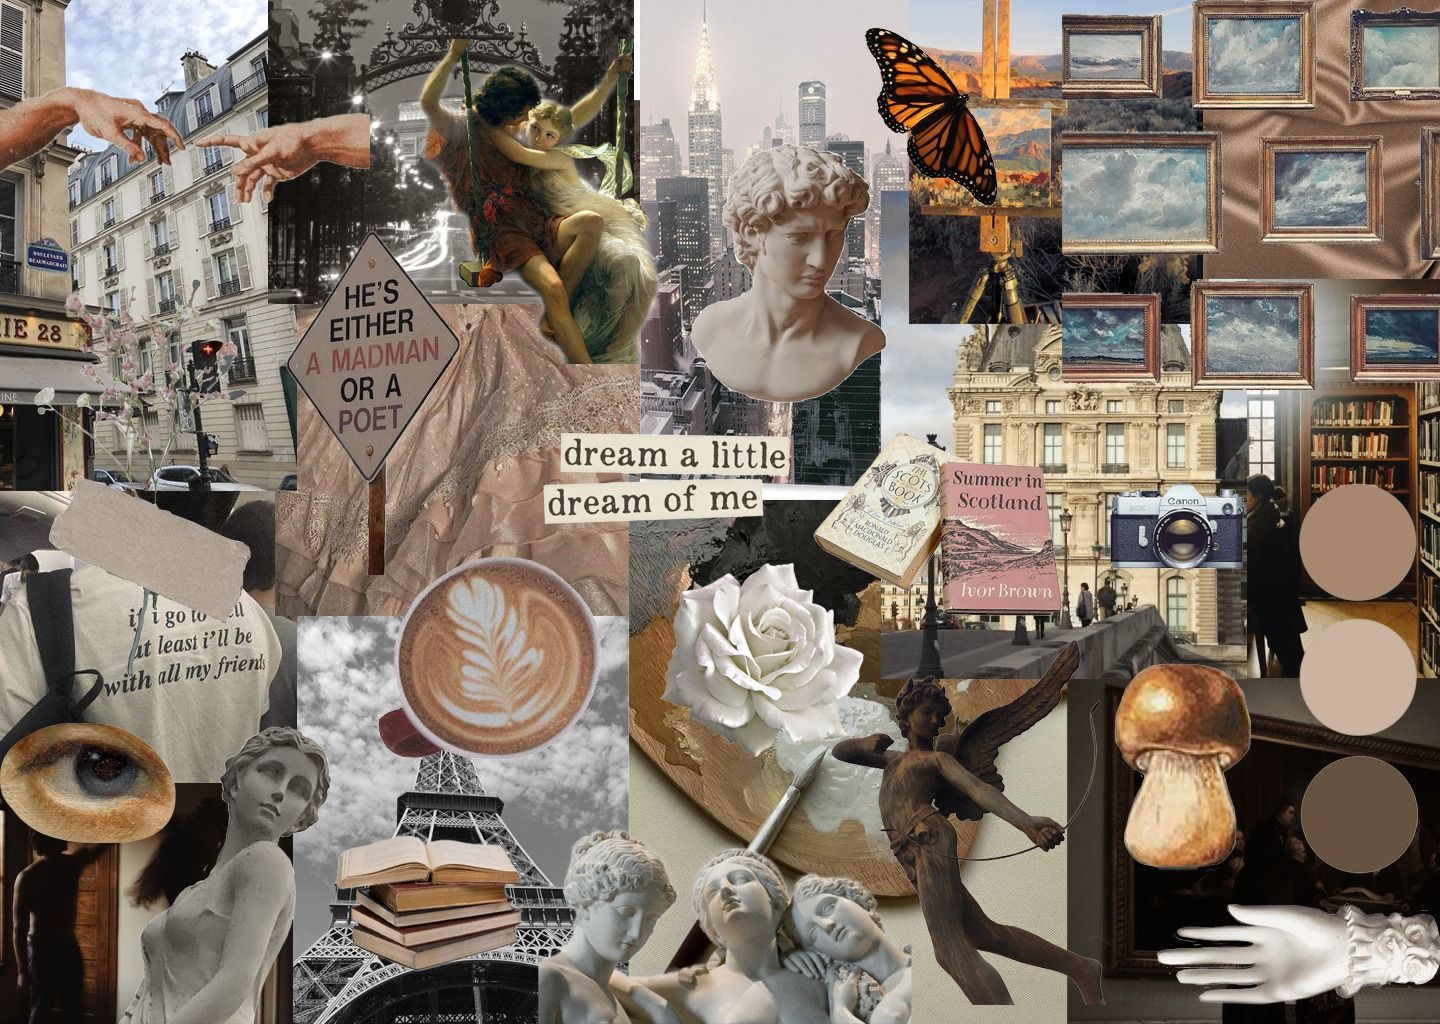 A collage of images, including a statue, a butterfly, a cup of coffee, and a book. - Light academia, dark academia